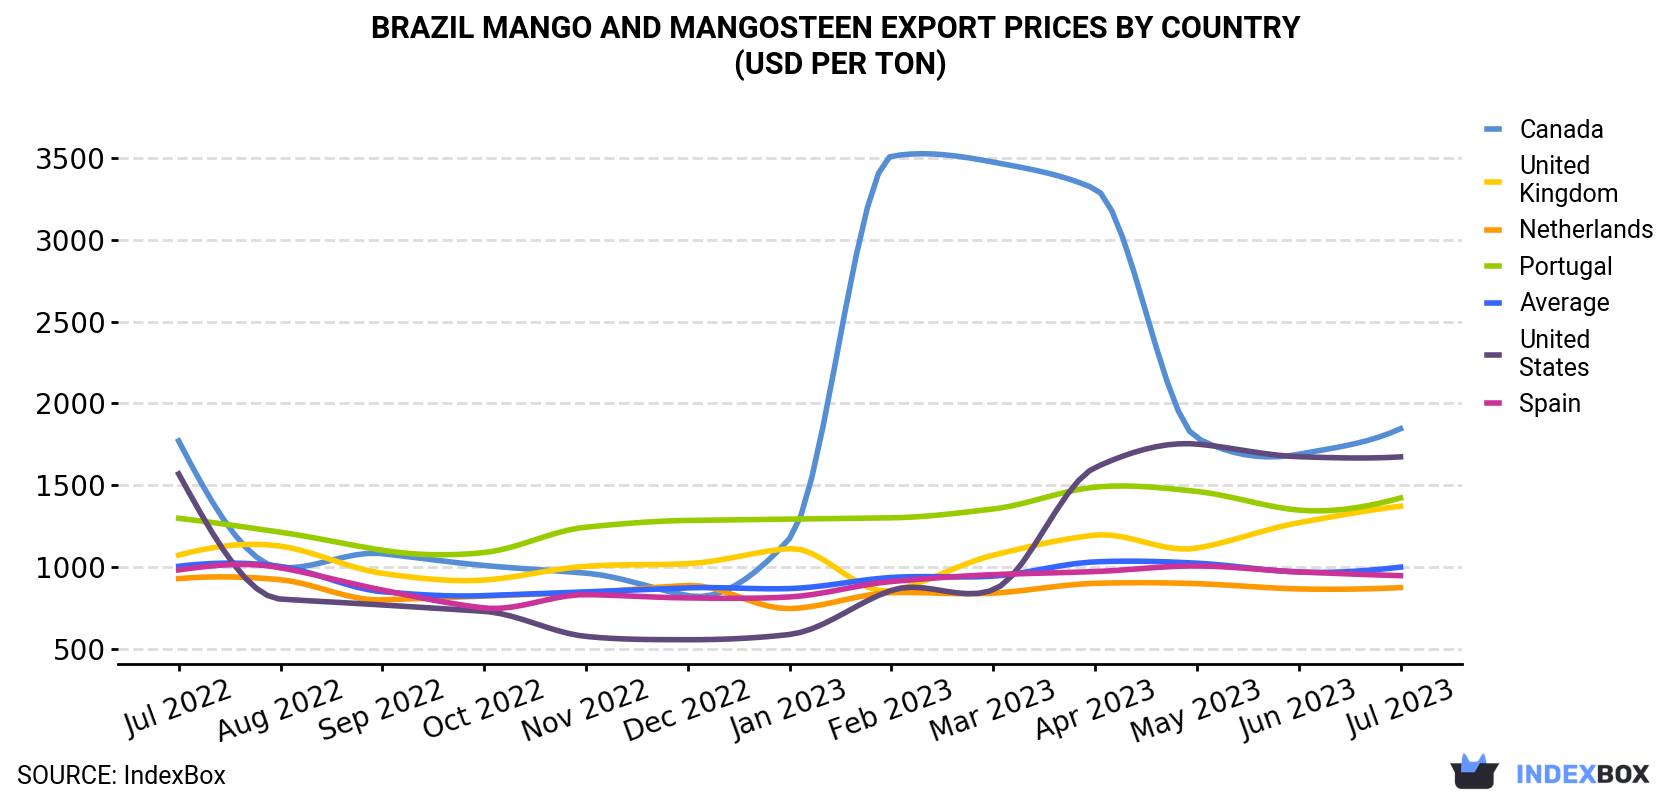 Brazil Mango And Mangosteen Export Prices By Country (USD Per Ton)